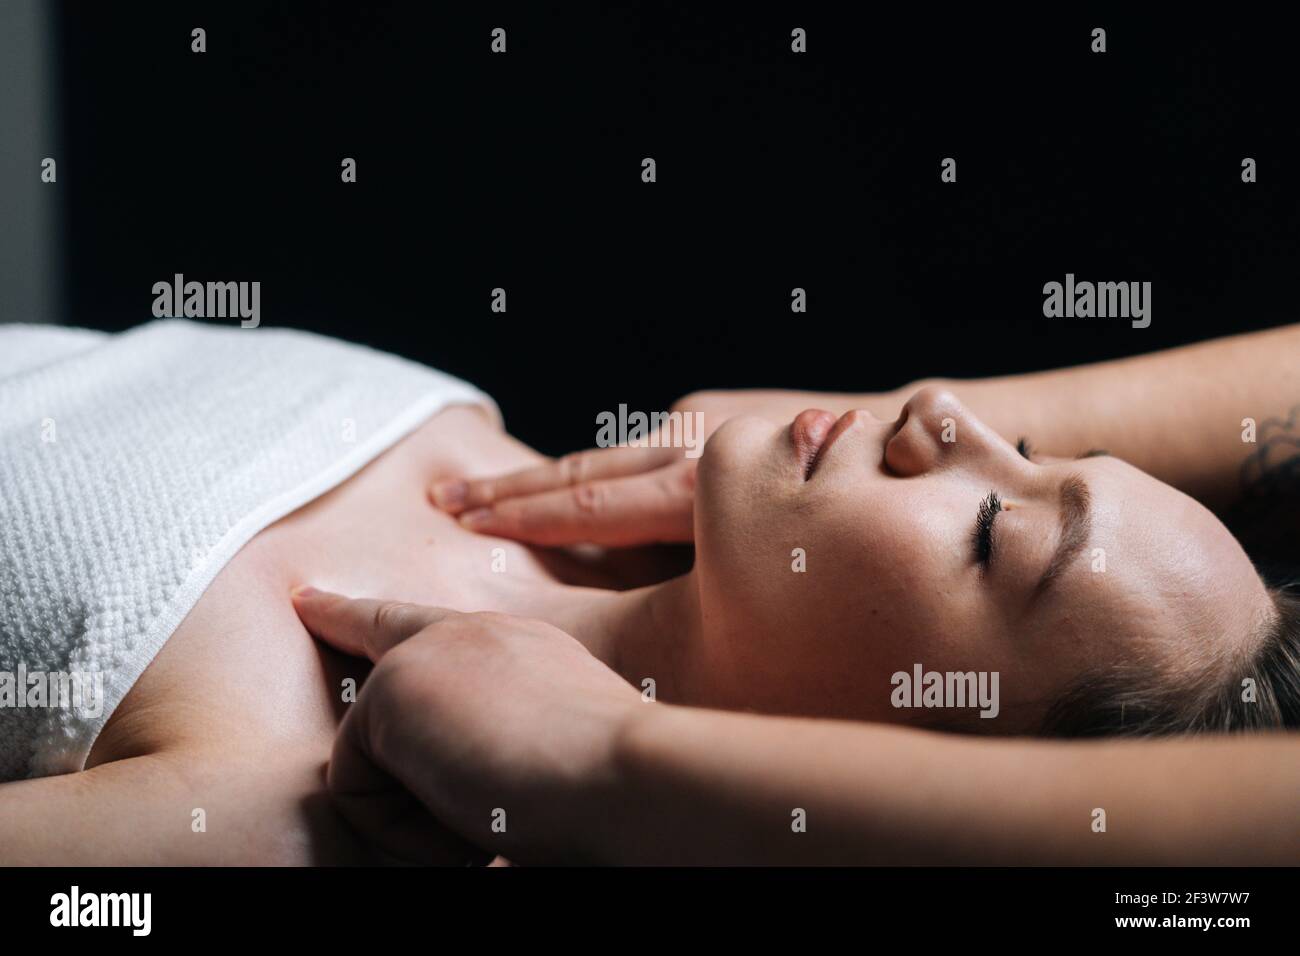 Close-up side view of young woman lying down on massage table during shoulder and neck massage Stock Photo